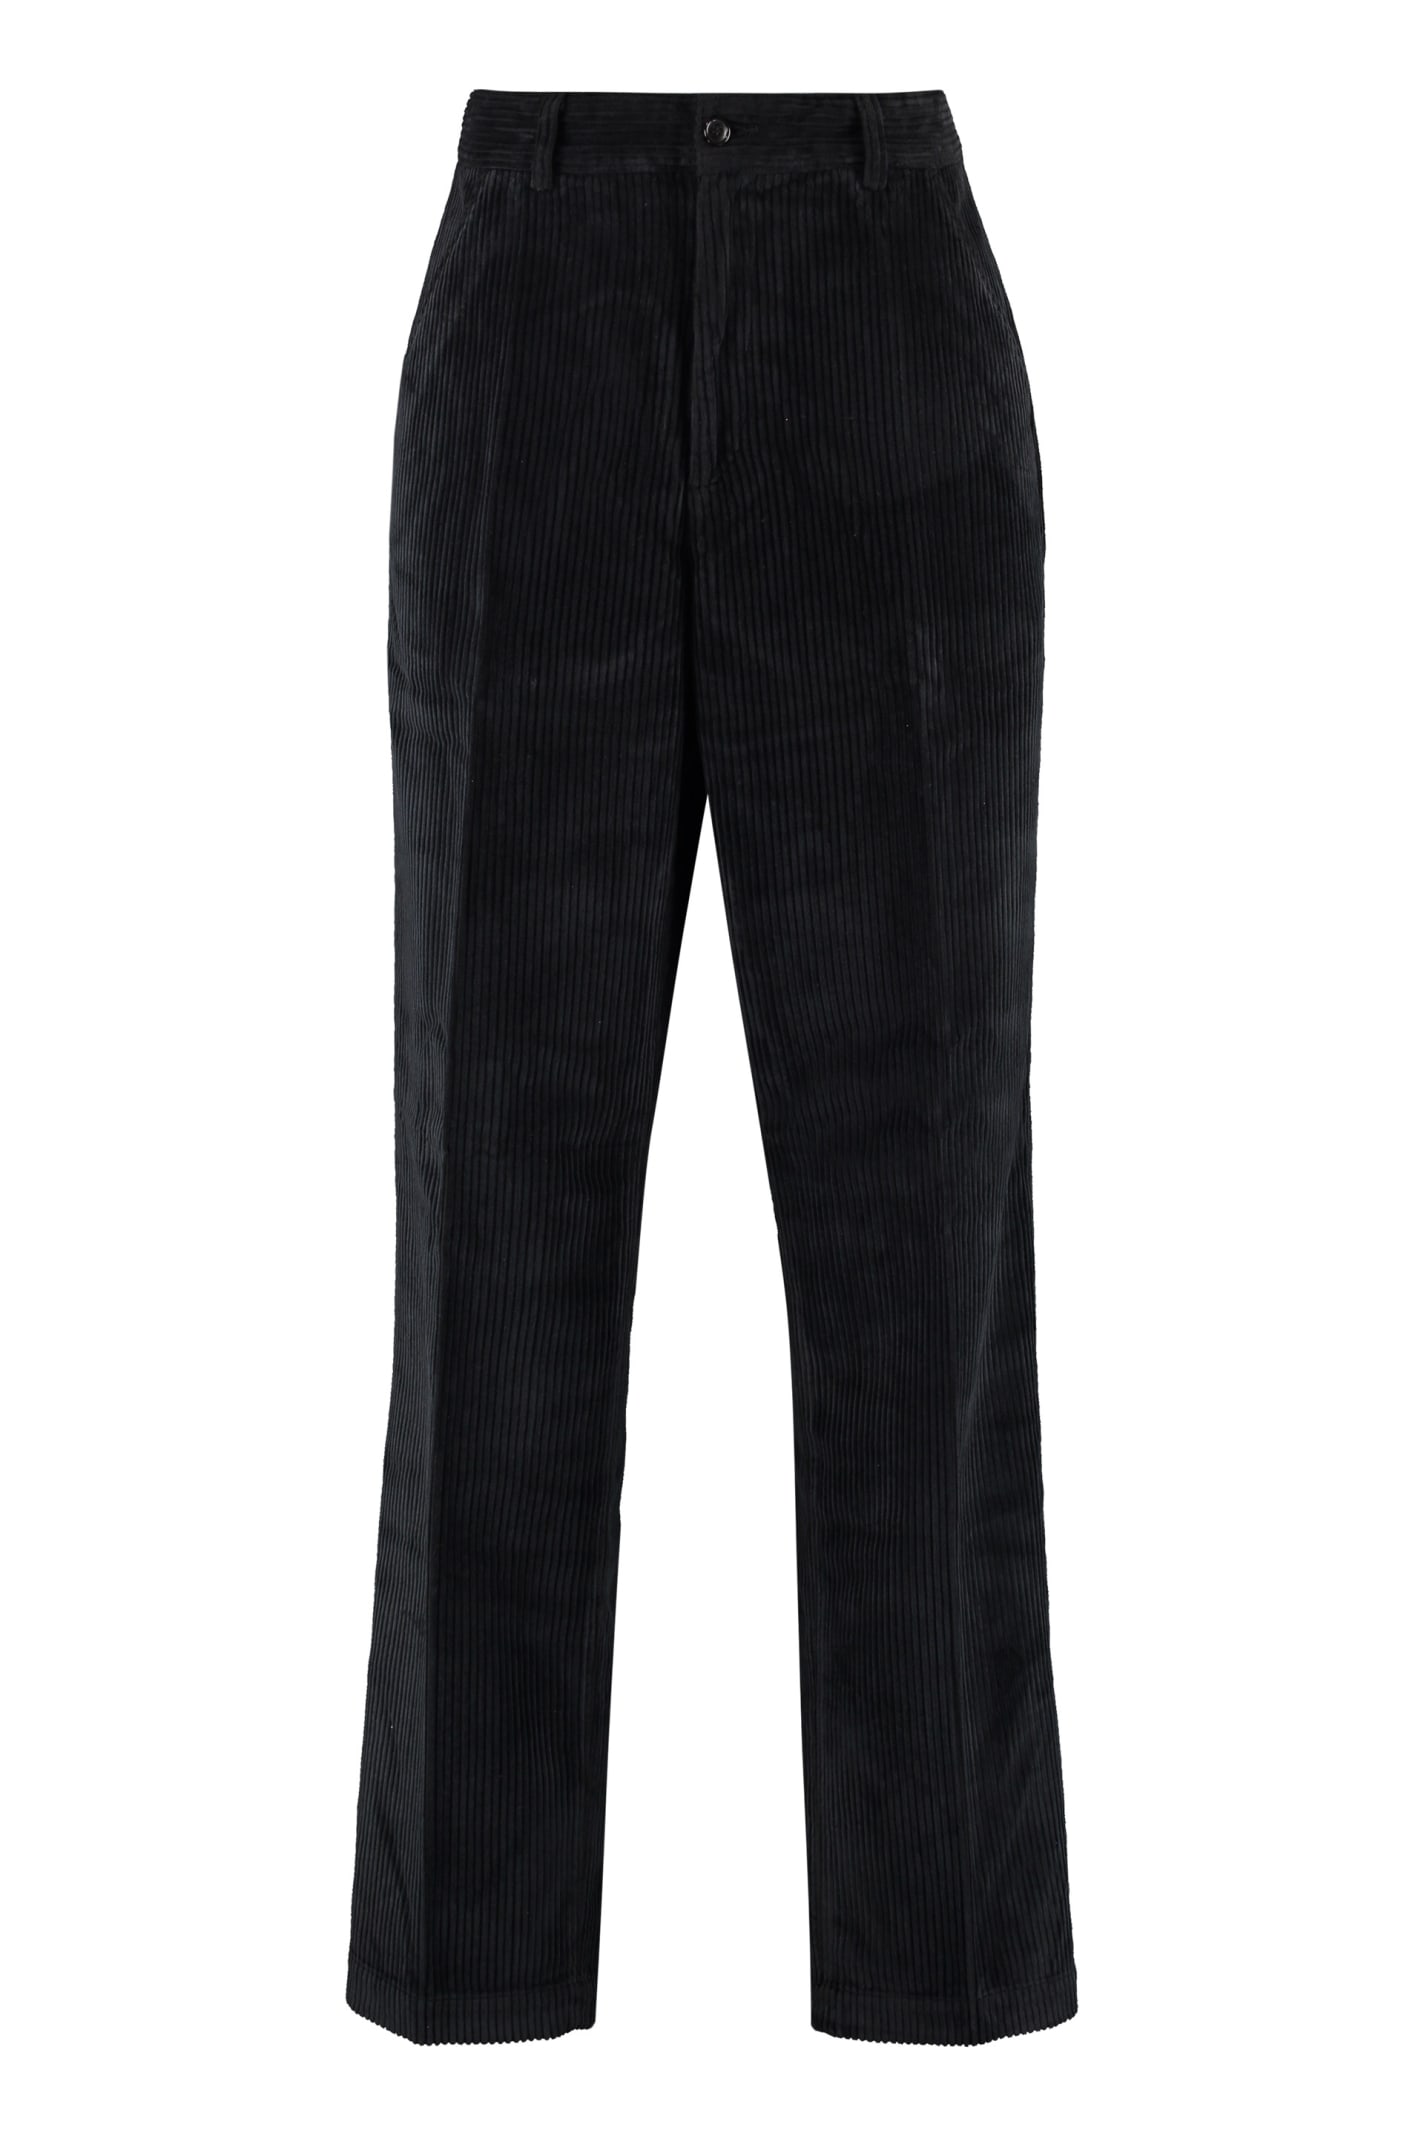 OUR LEGACY CHINO 22 CORDUROY TROUSERS